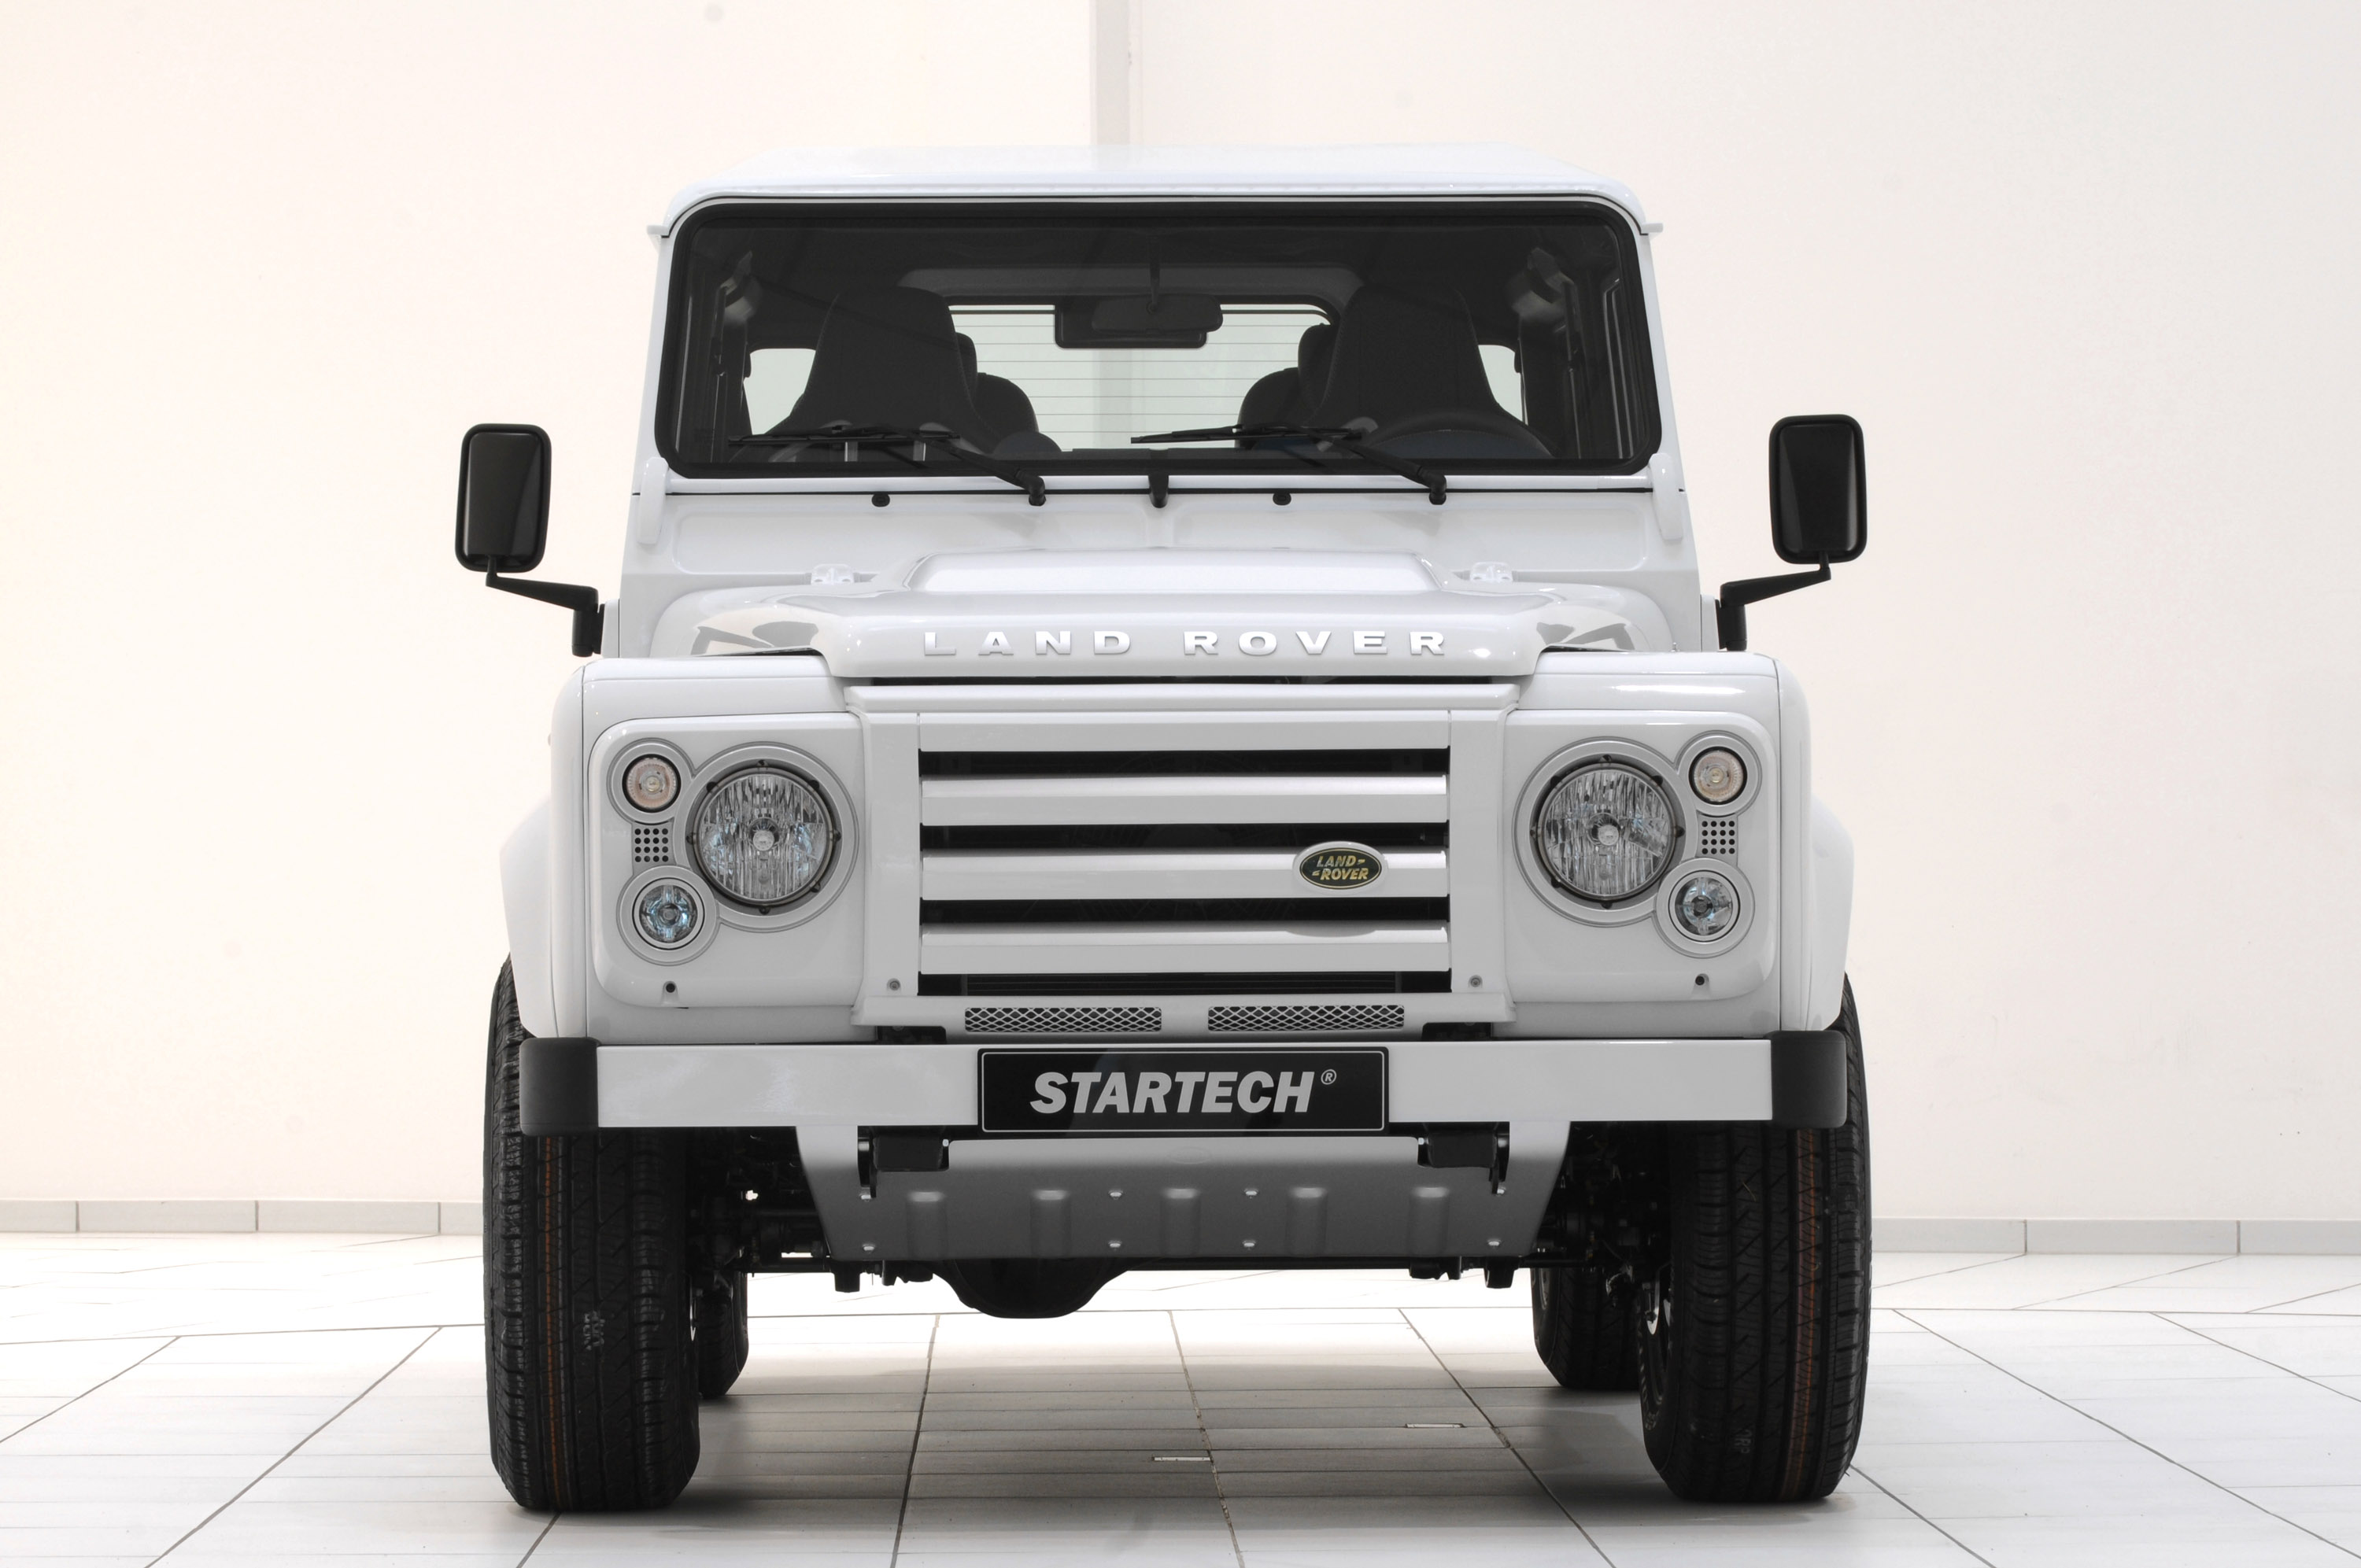 STARTECH Land Rover Defender 90 Yachting Edition